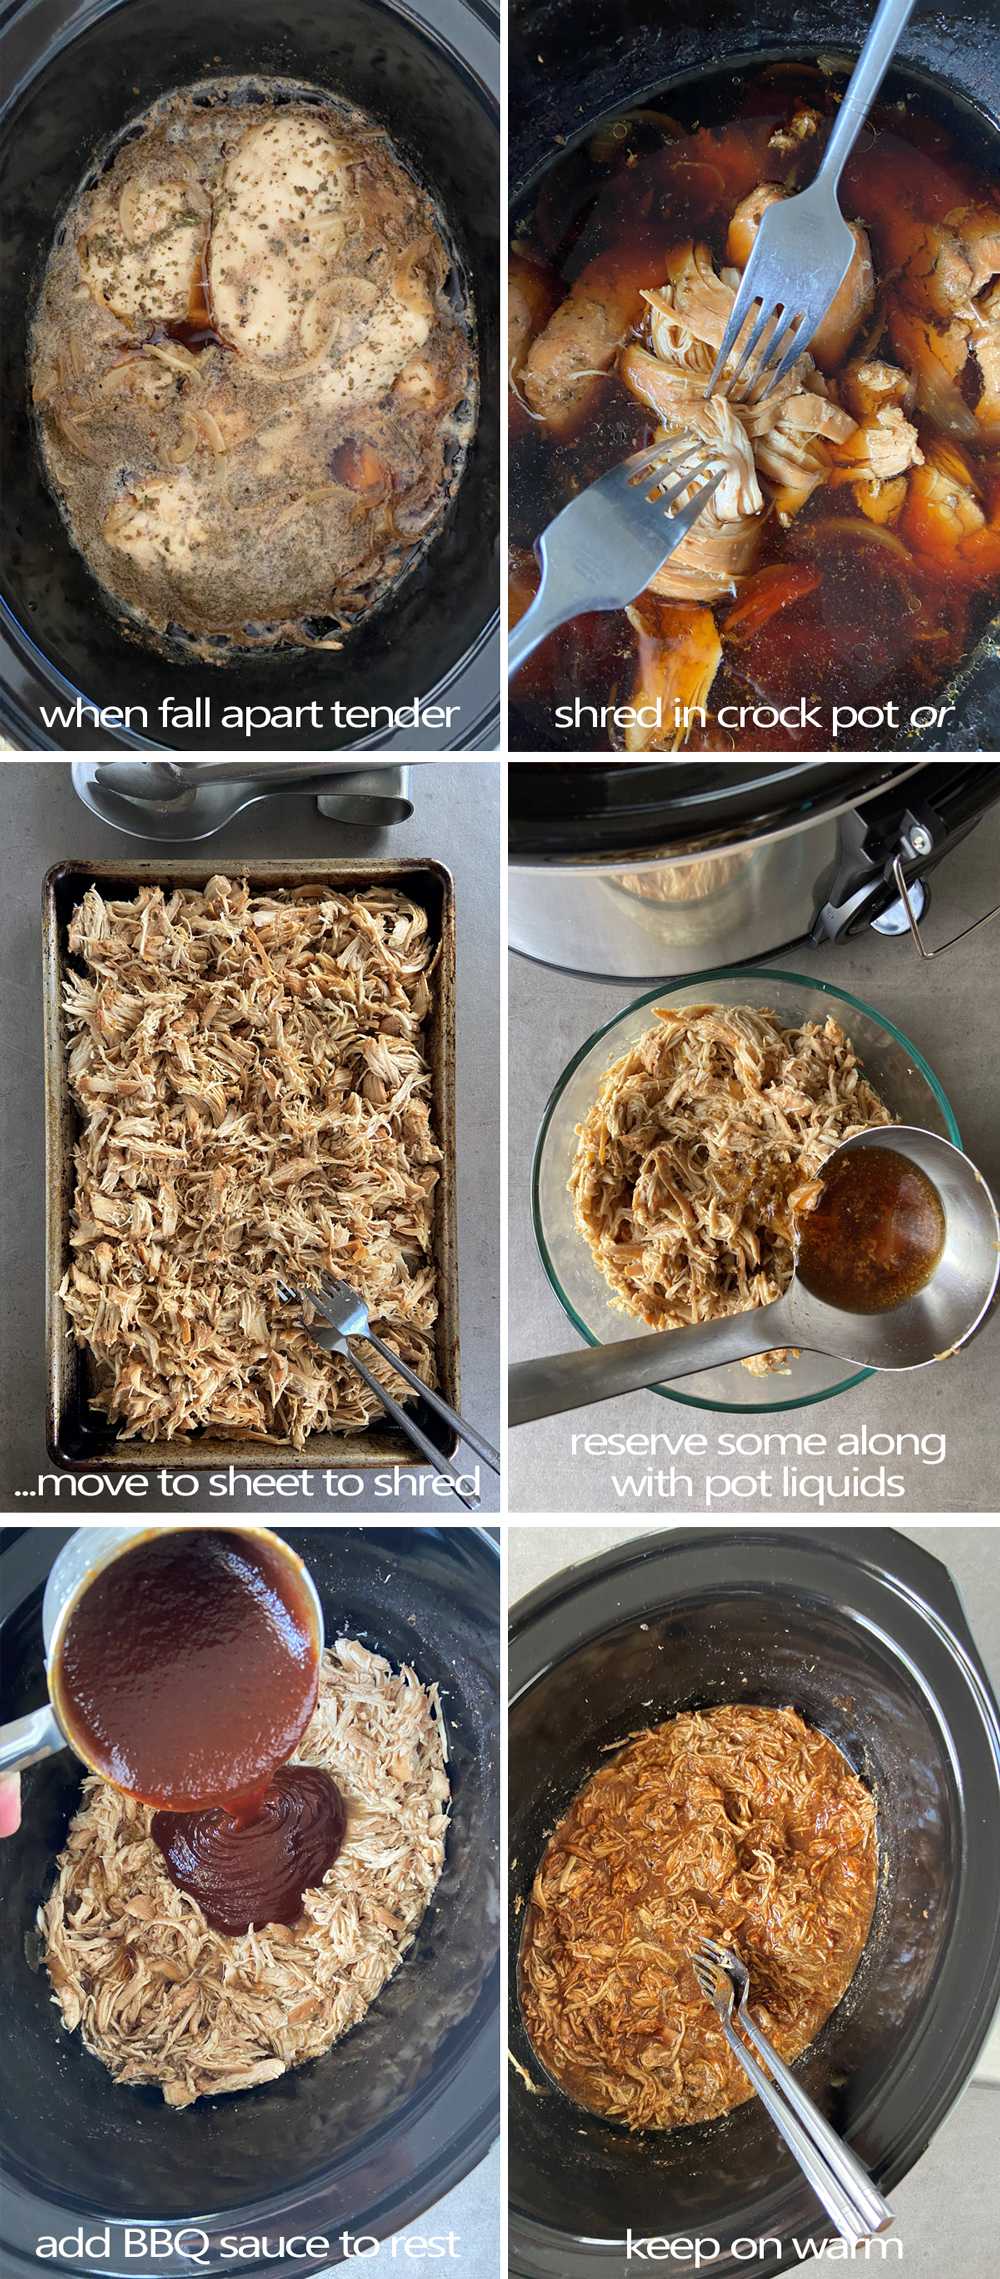 How to shred the meat for crock pot pulled chicken. Add BBQ sauce for BBQ pulled chiken with beer. 